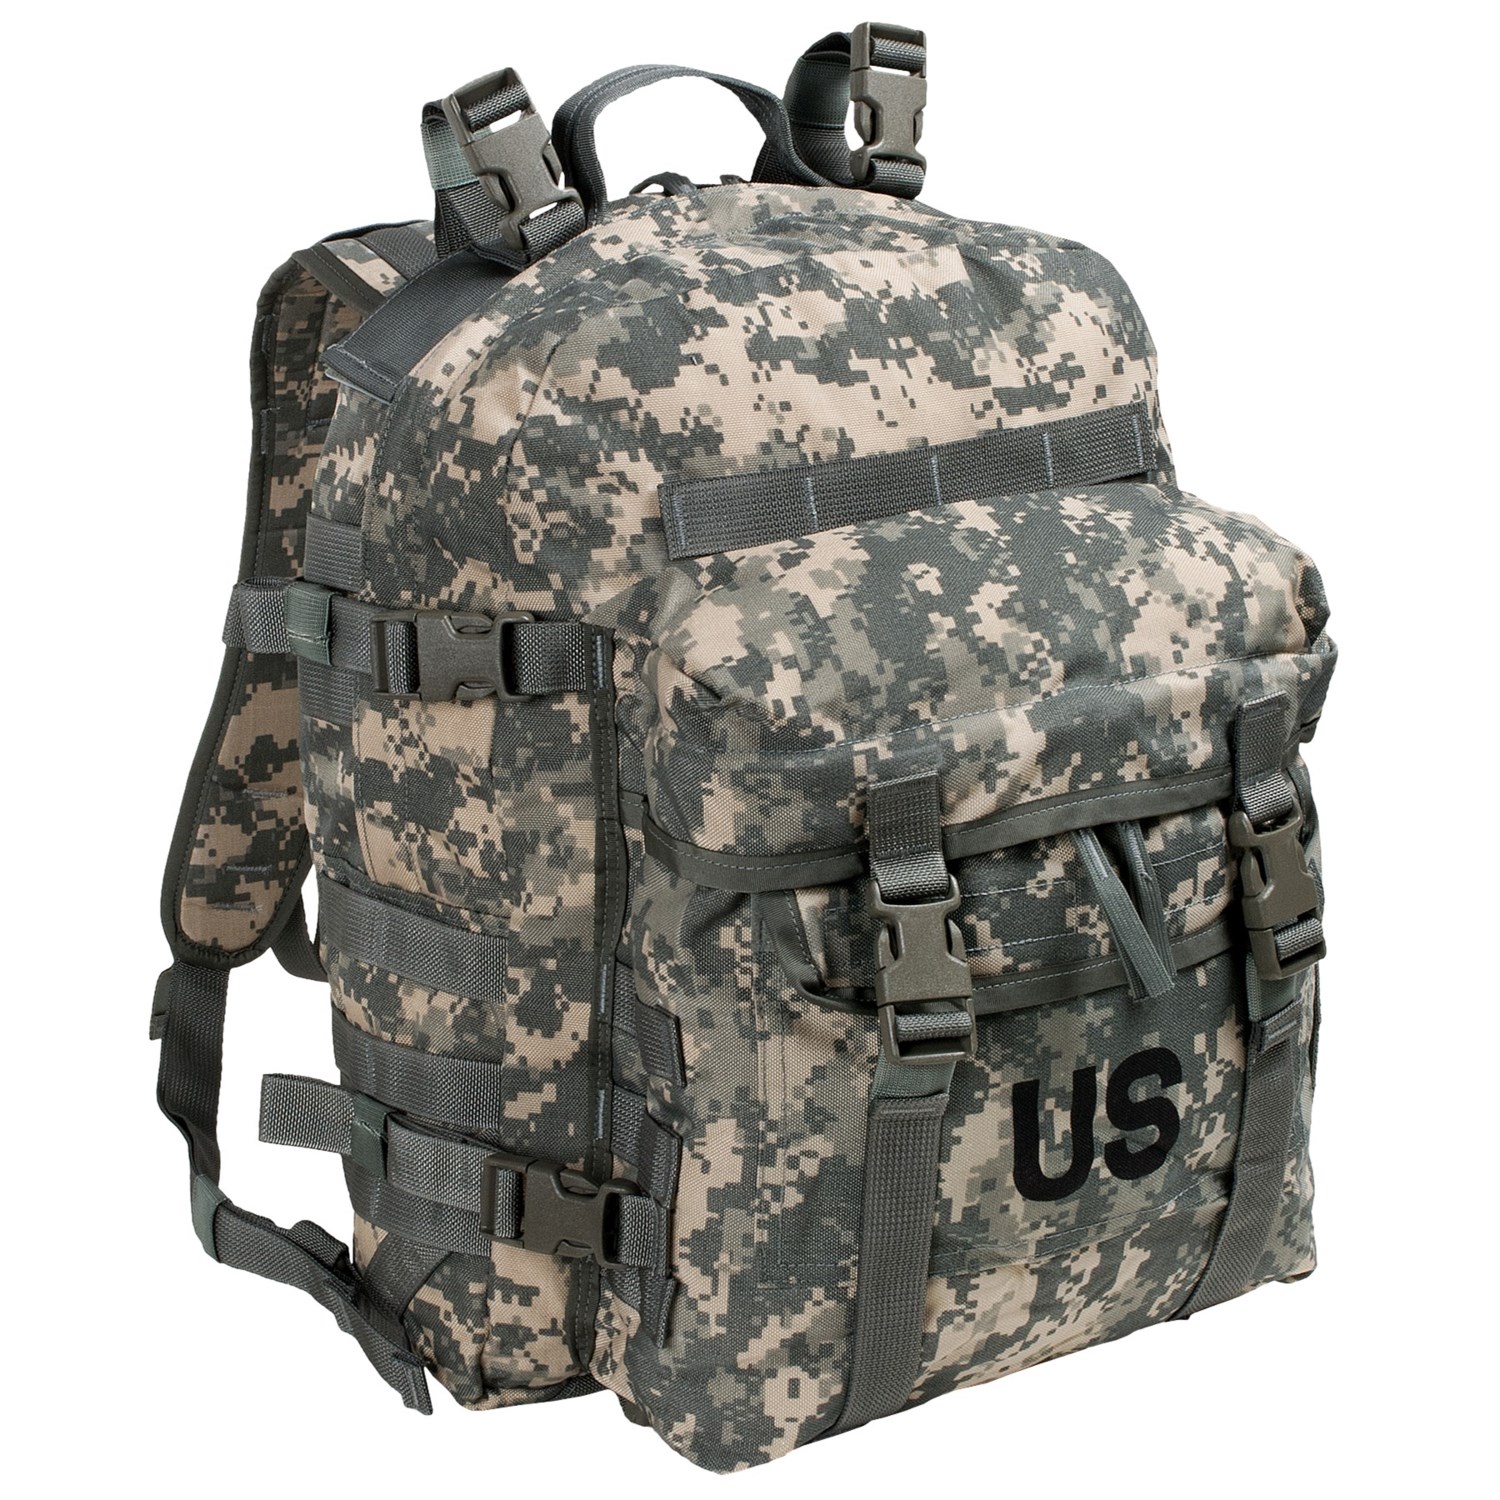 ThreeDay Military Issue Backpack 4956D Save 36